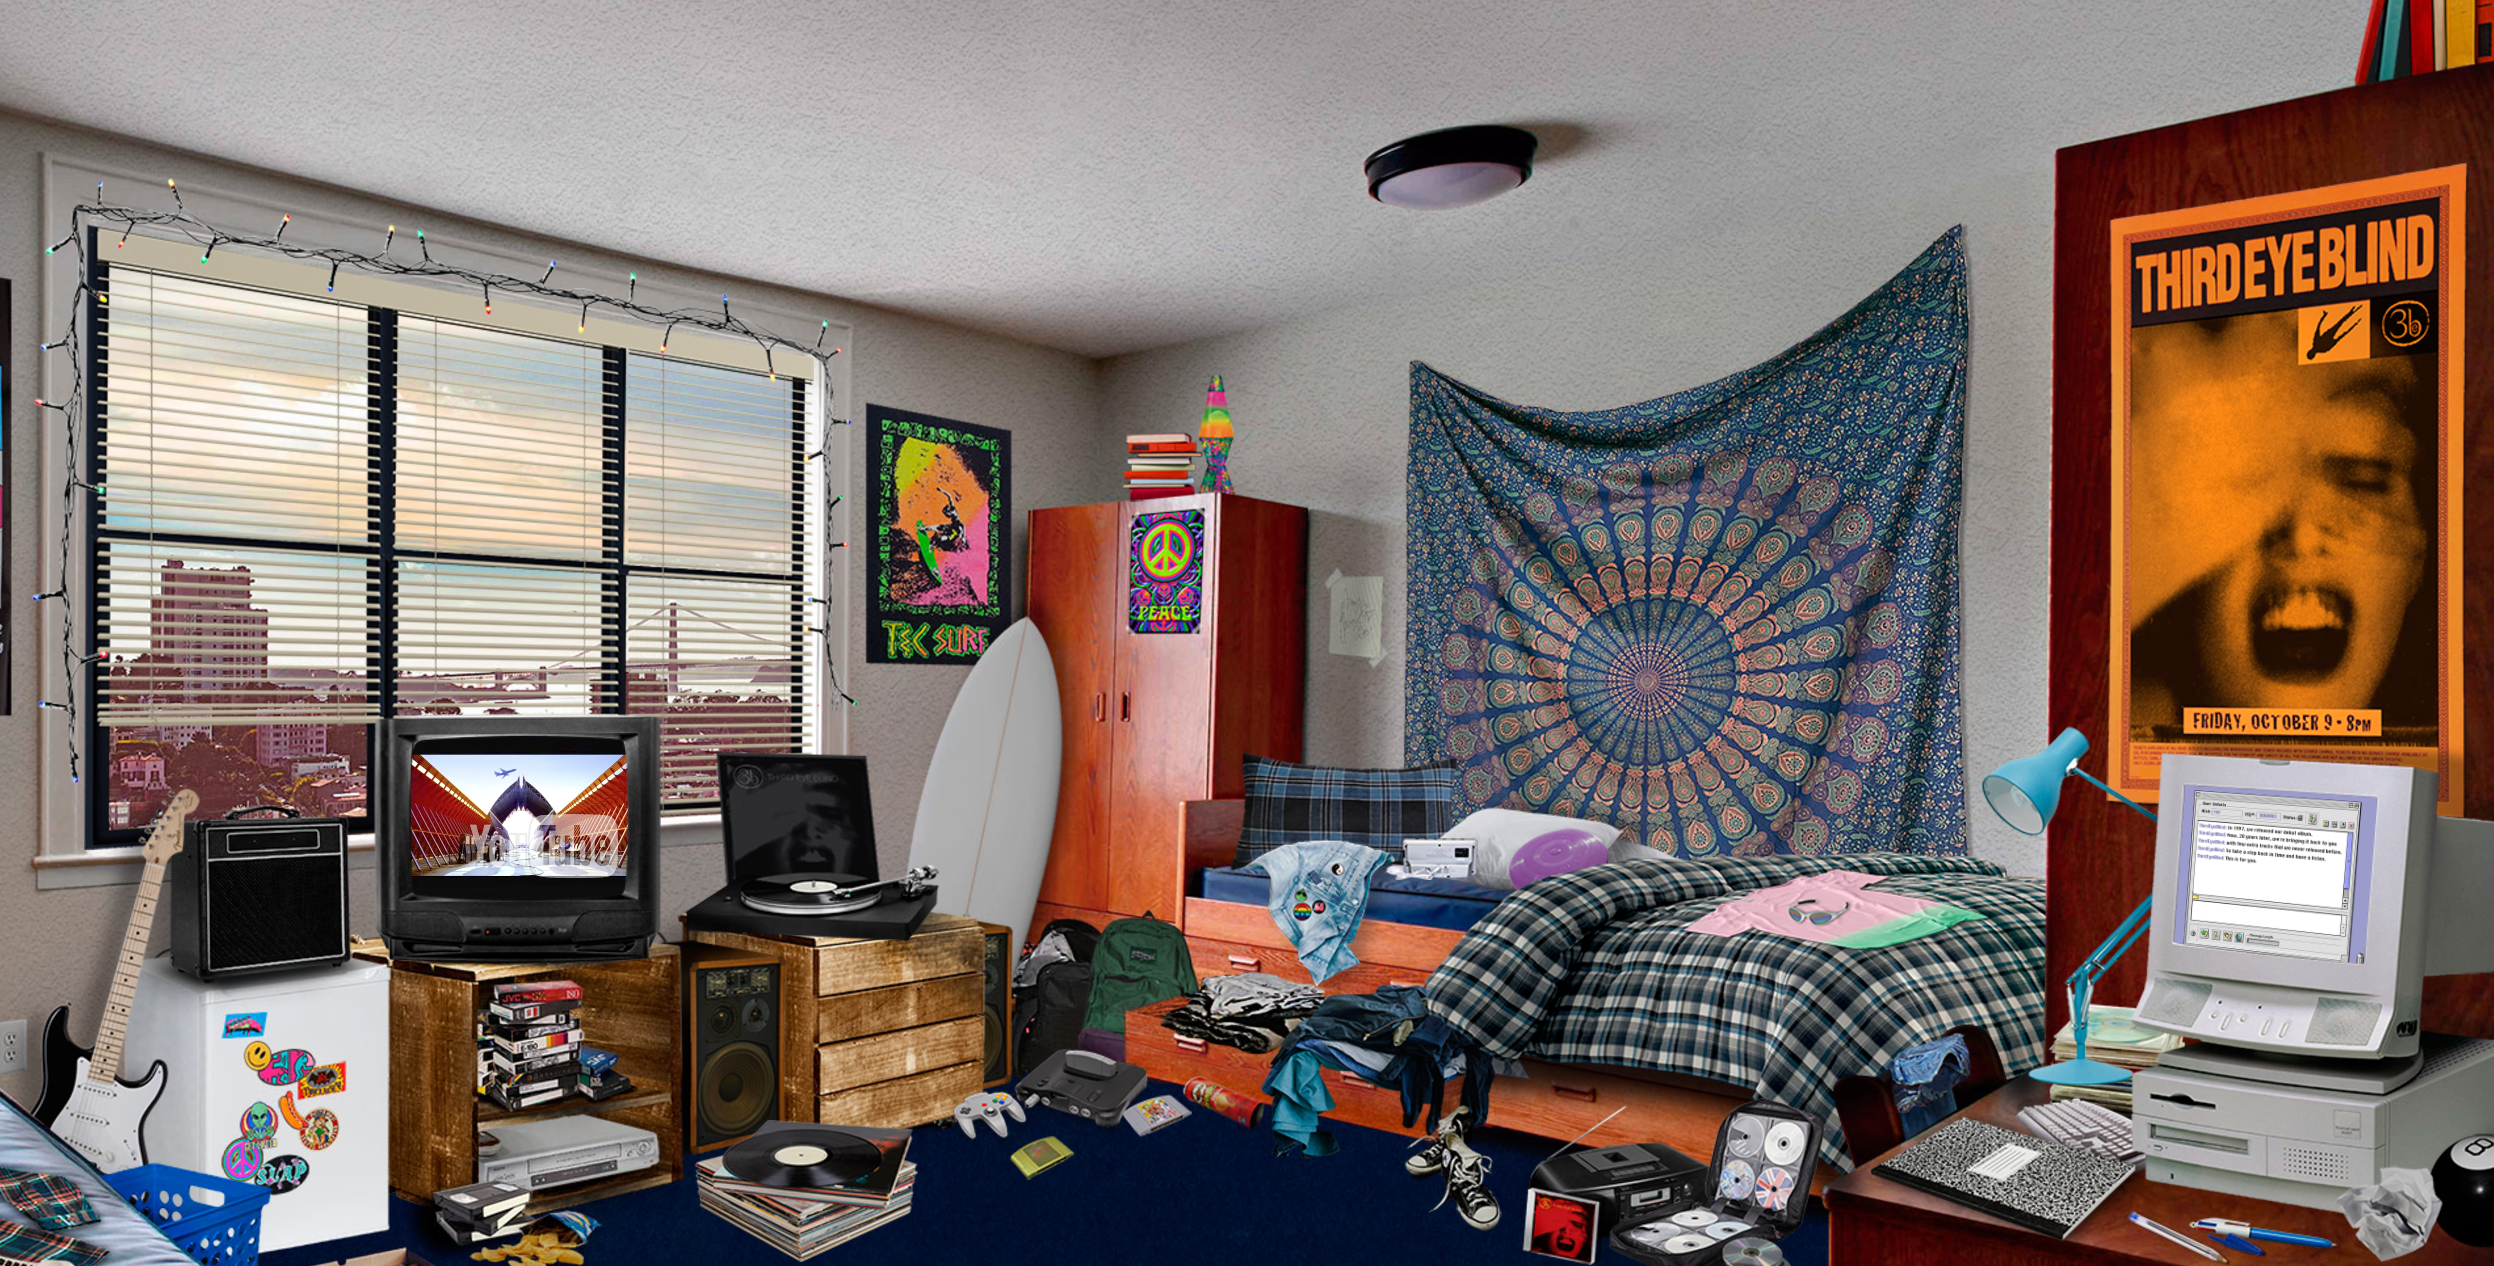 Third Eye Blind Has Recreated Your '90s Bedroom to Celebrate the 20th Anniversary of Their Self-Titled Album